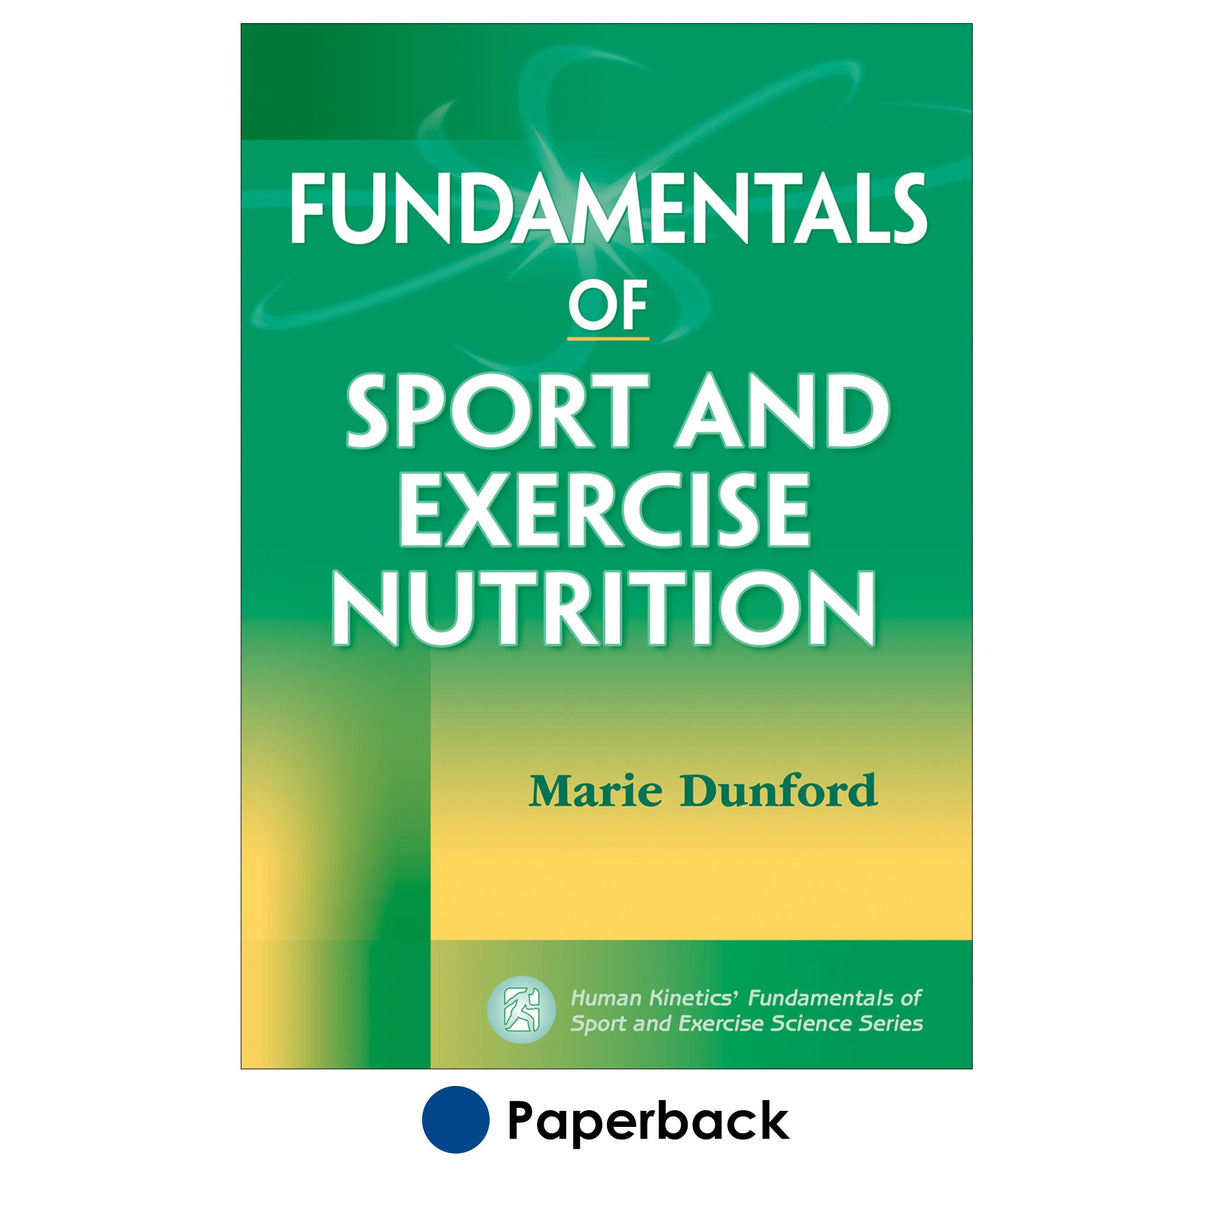 Fundamentals of Sport and Exercise Nutrition